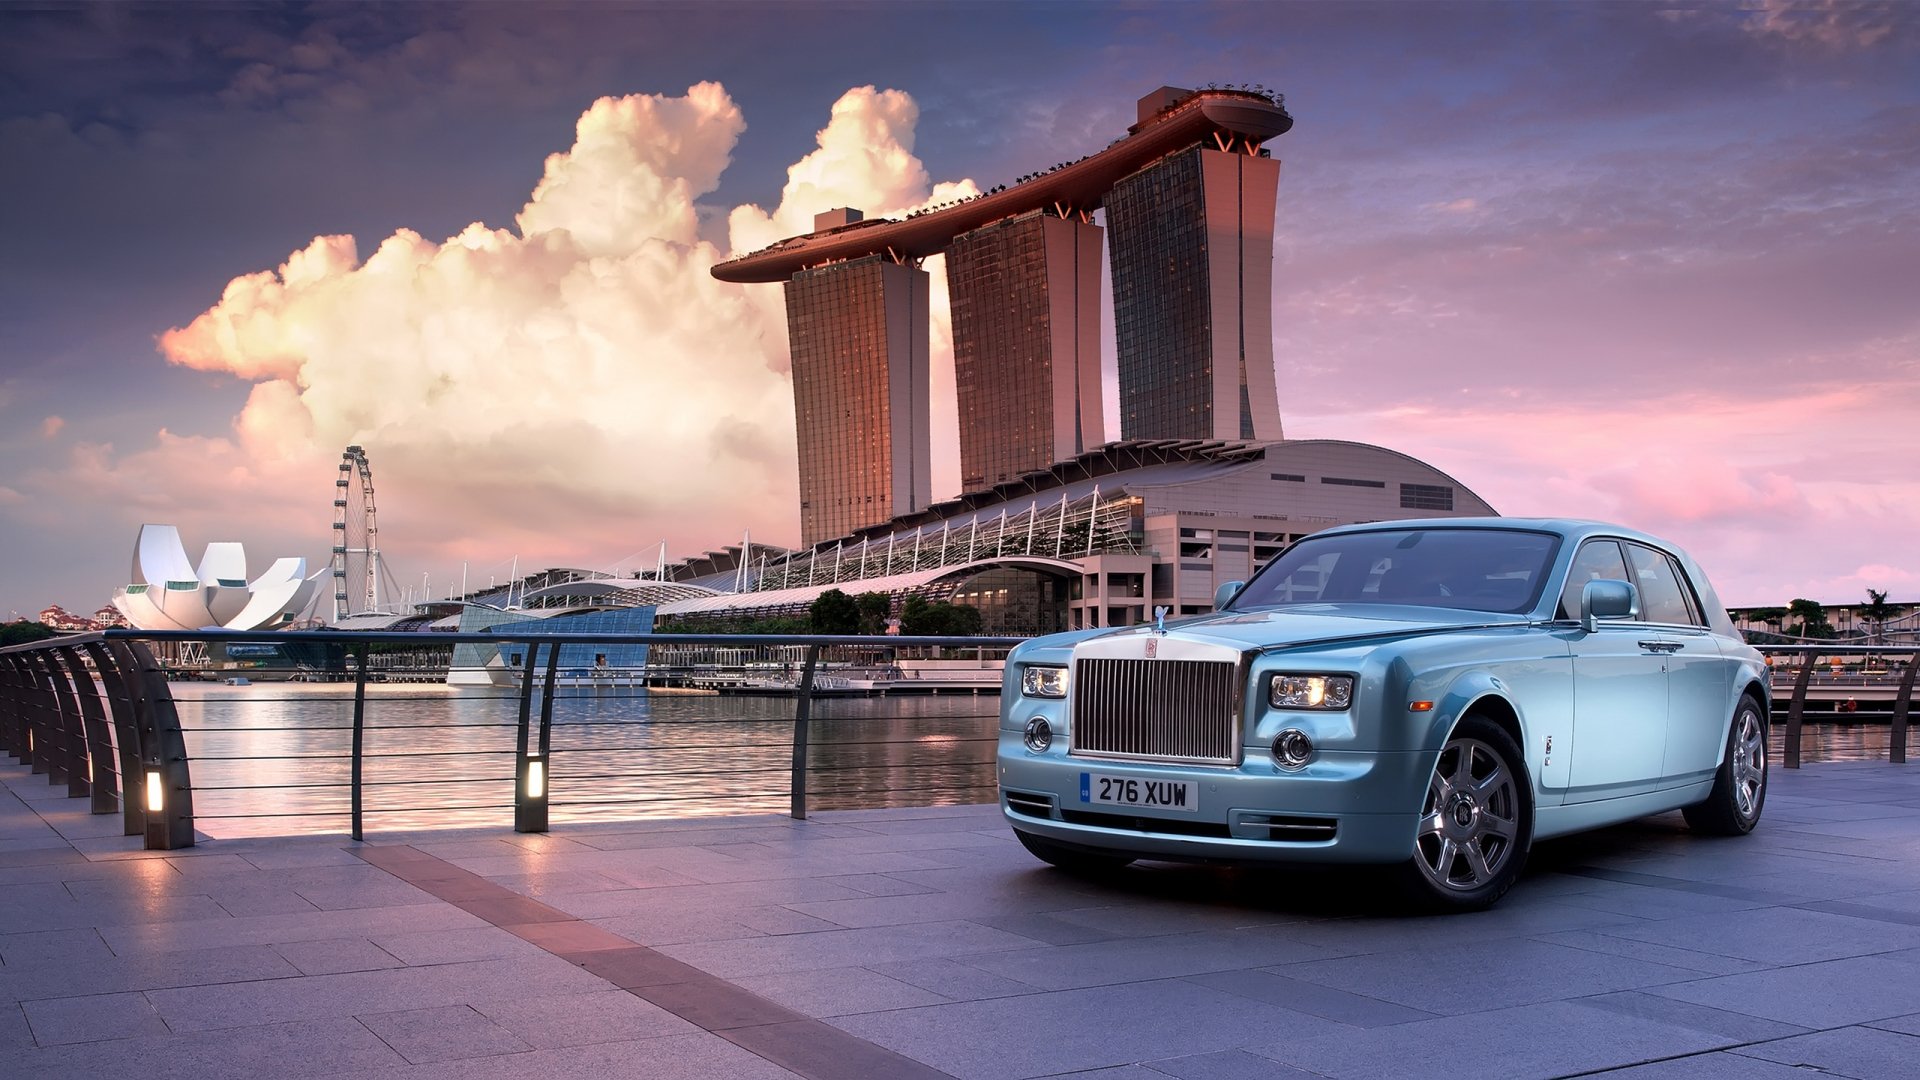 100+ Rolls-Royce Phantom HD Wallpapers and Backgrounds